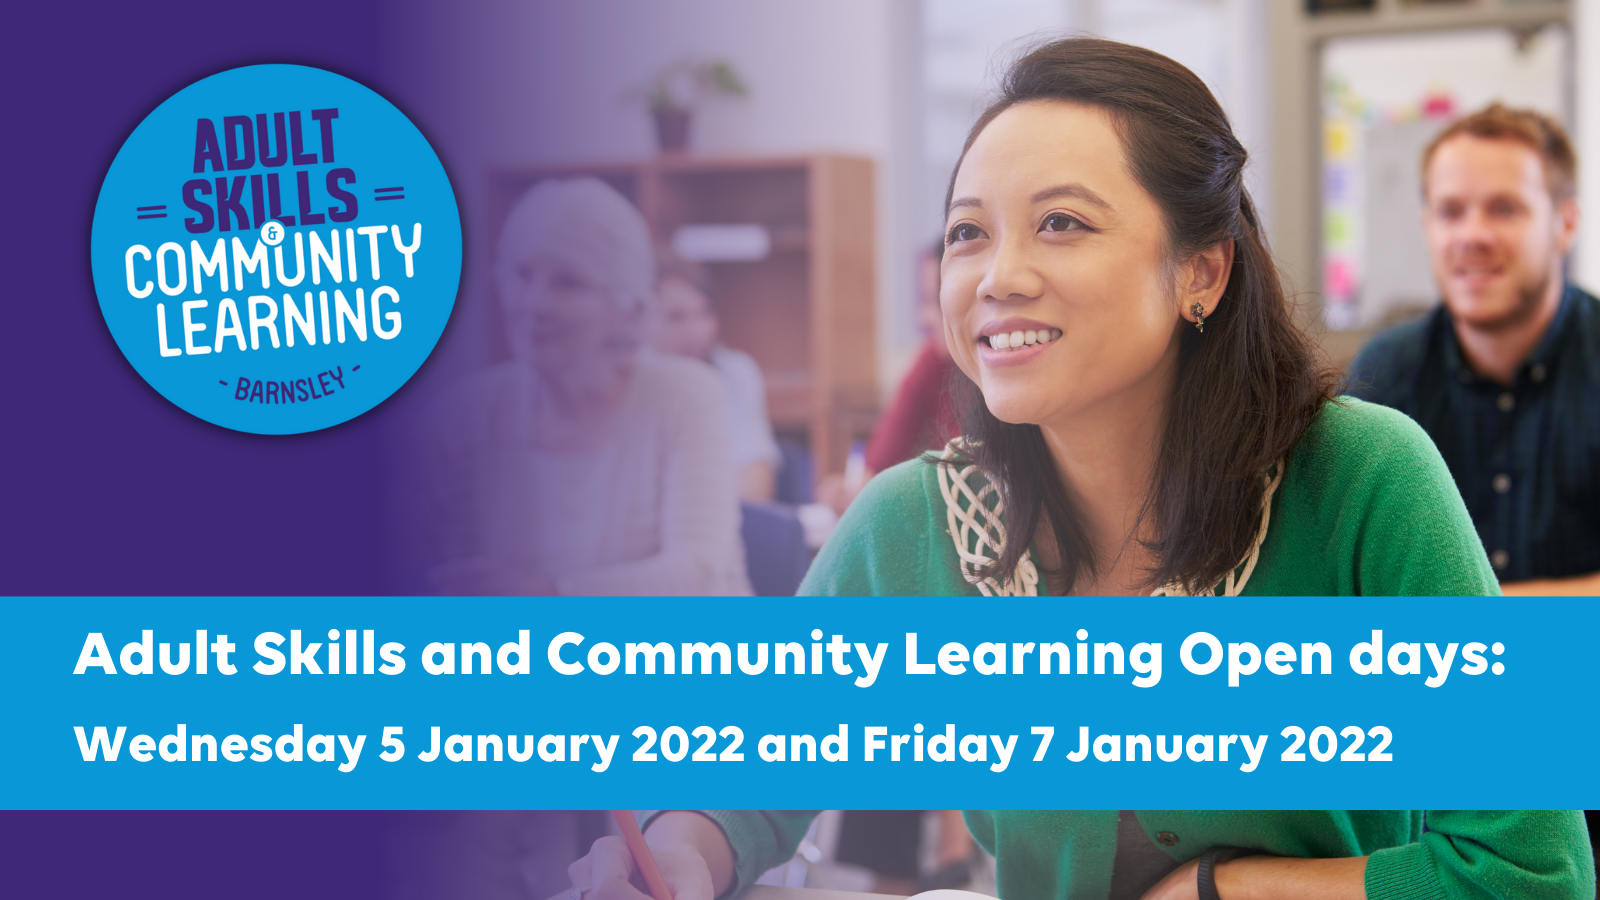 Adult Skills and Community Learning Open Days with photo of adults in a classroom